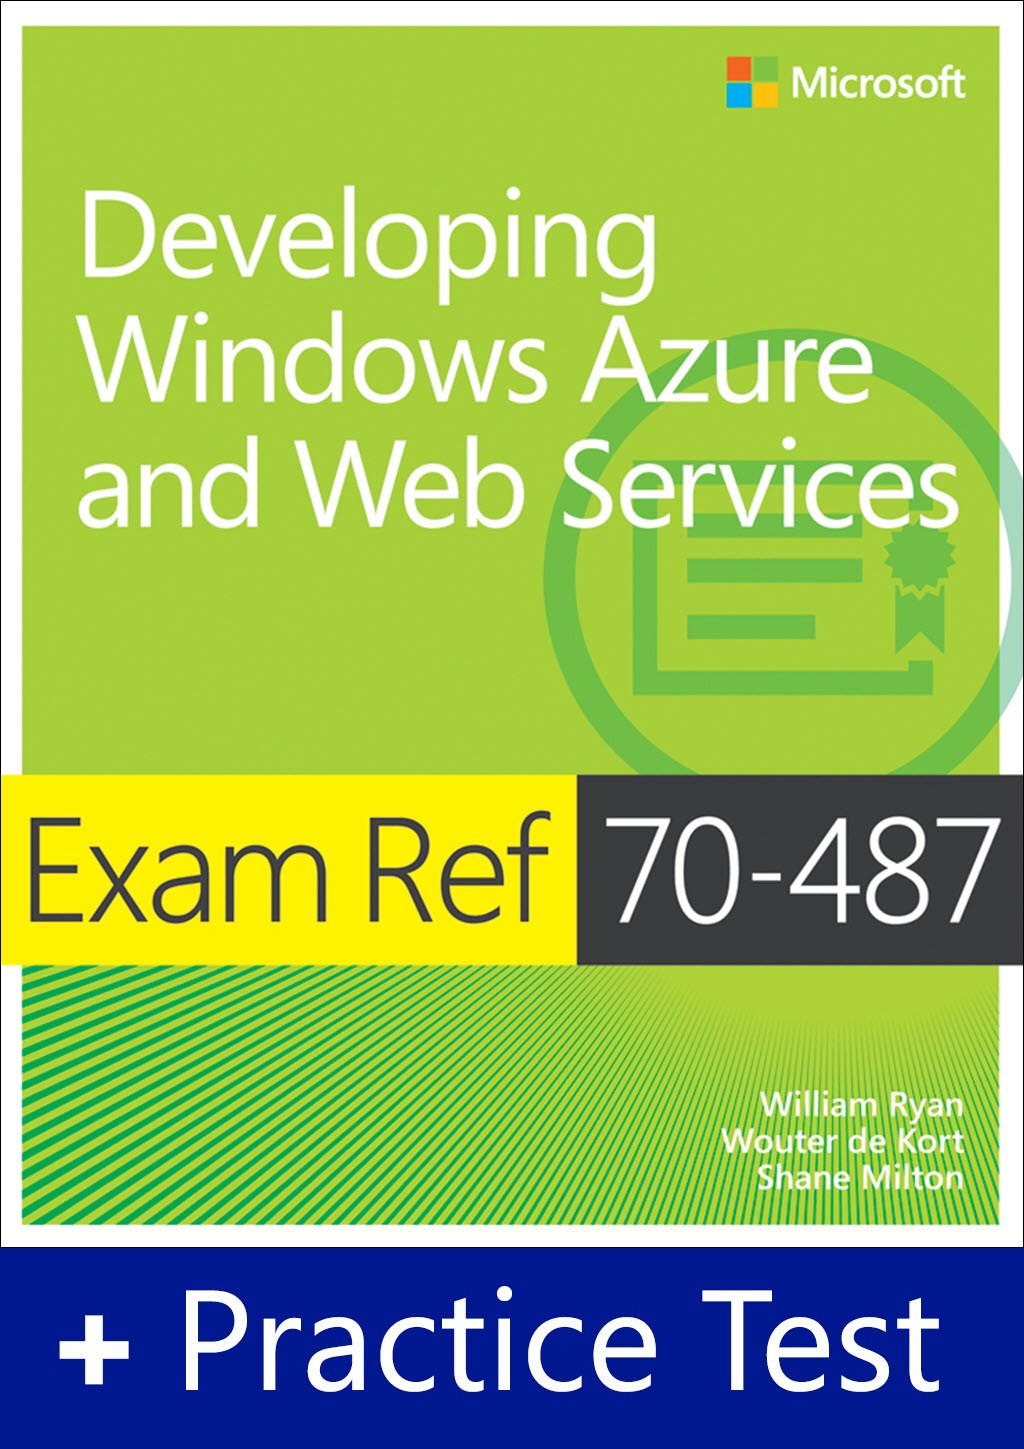 Exam Ref 70-487 Developing Windows Azure and Web Services with Practice Test